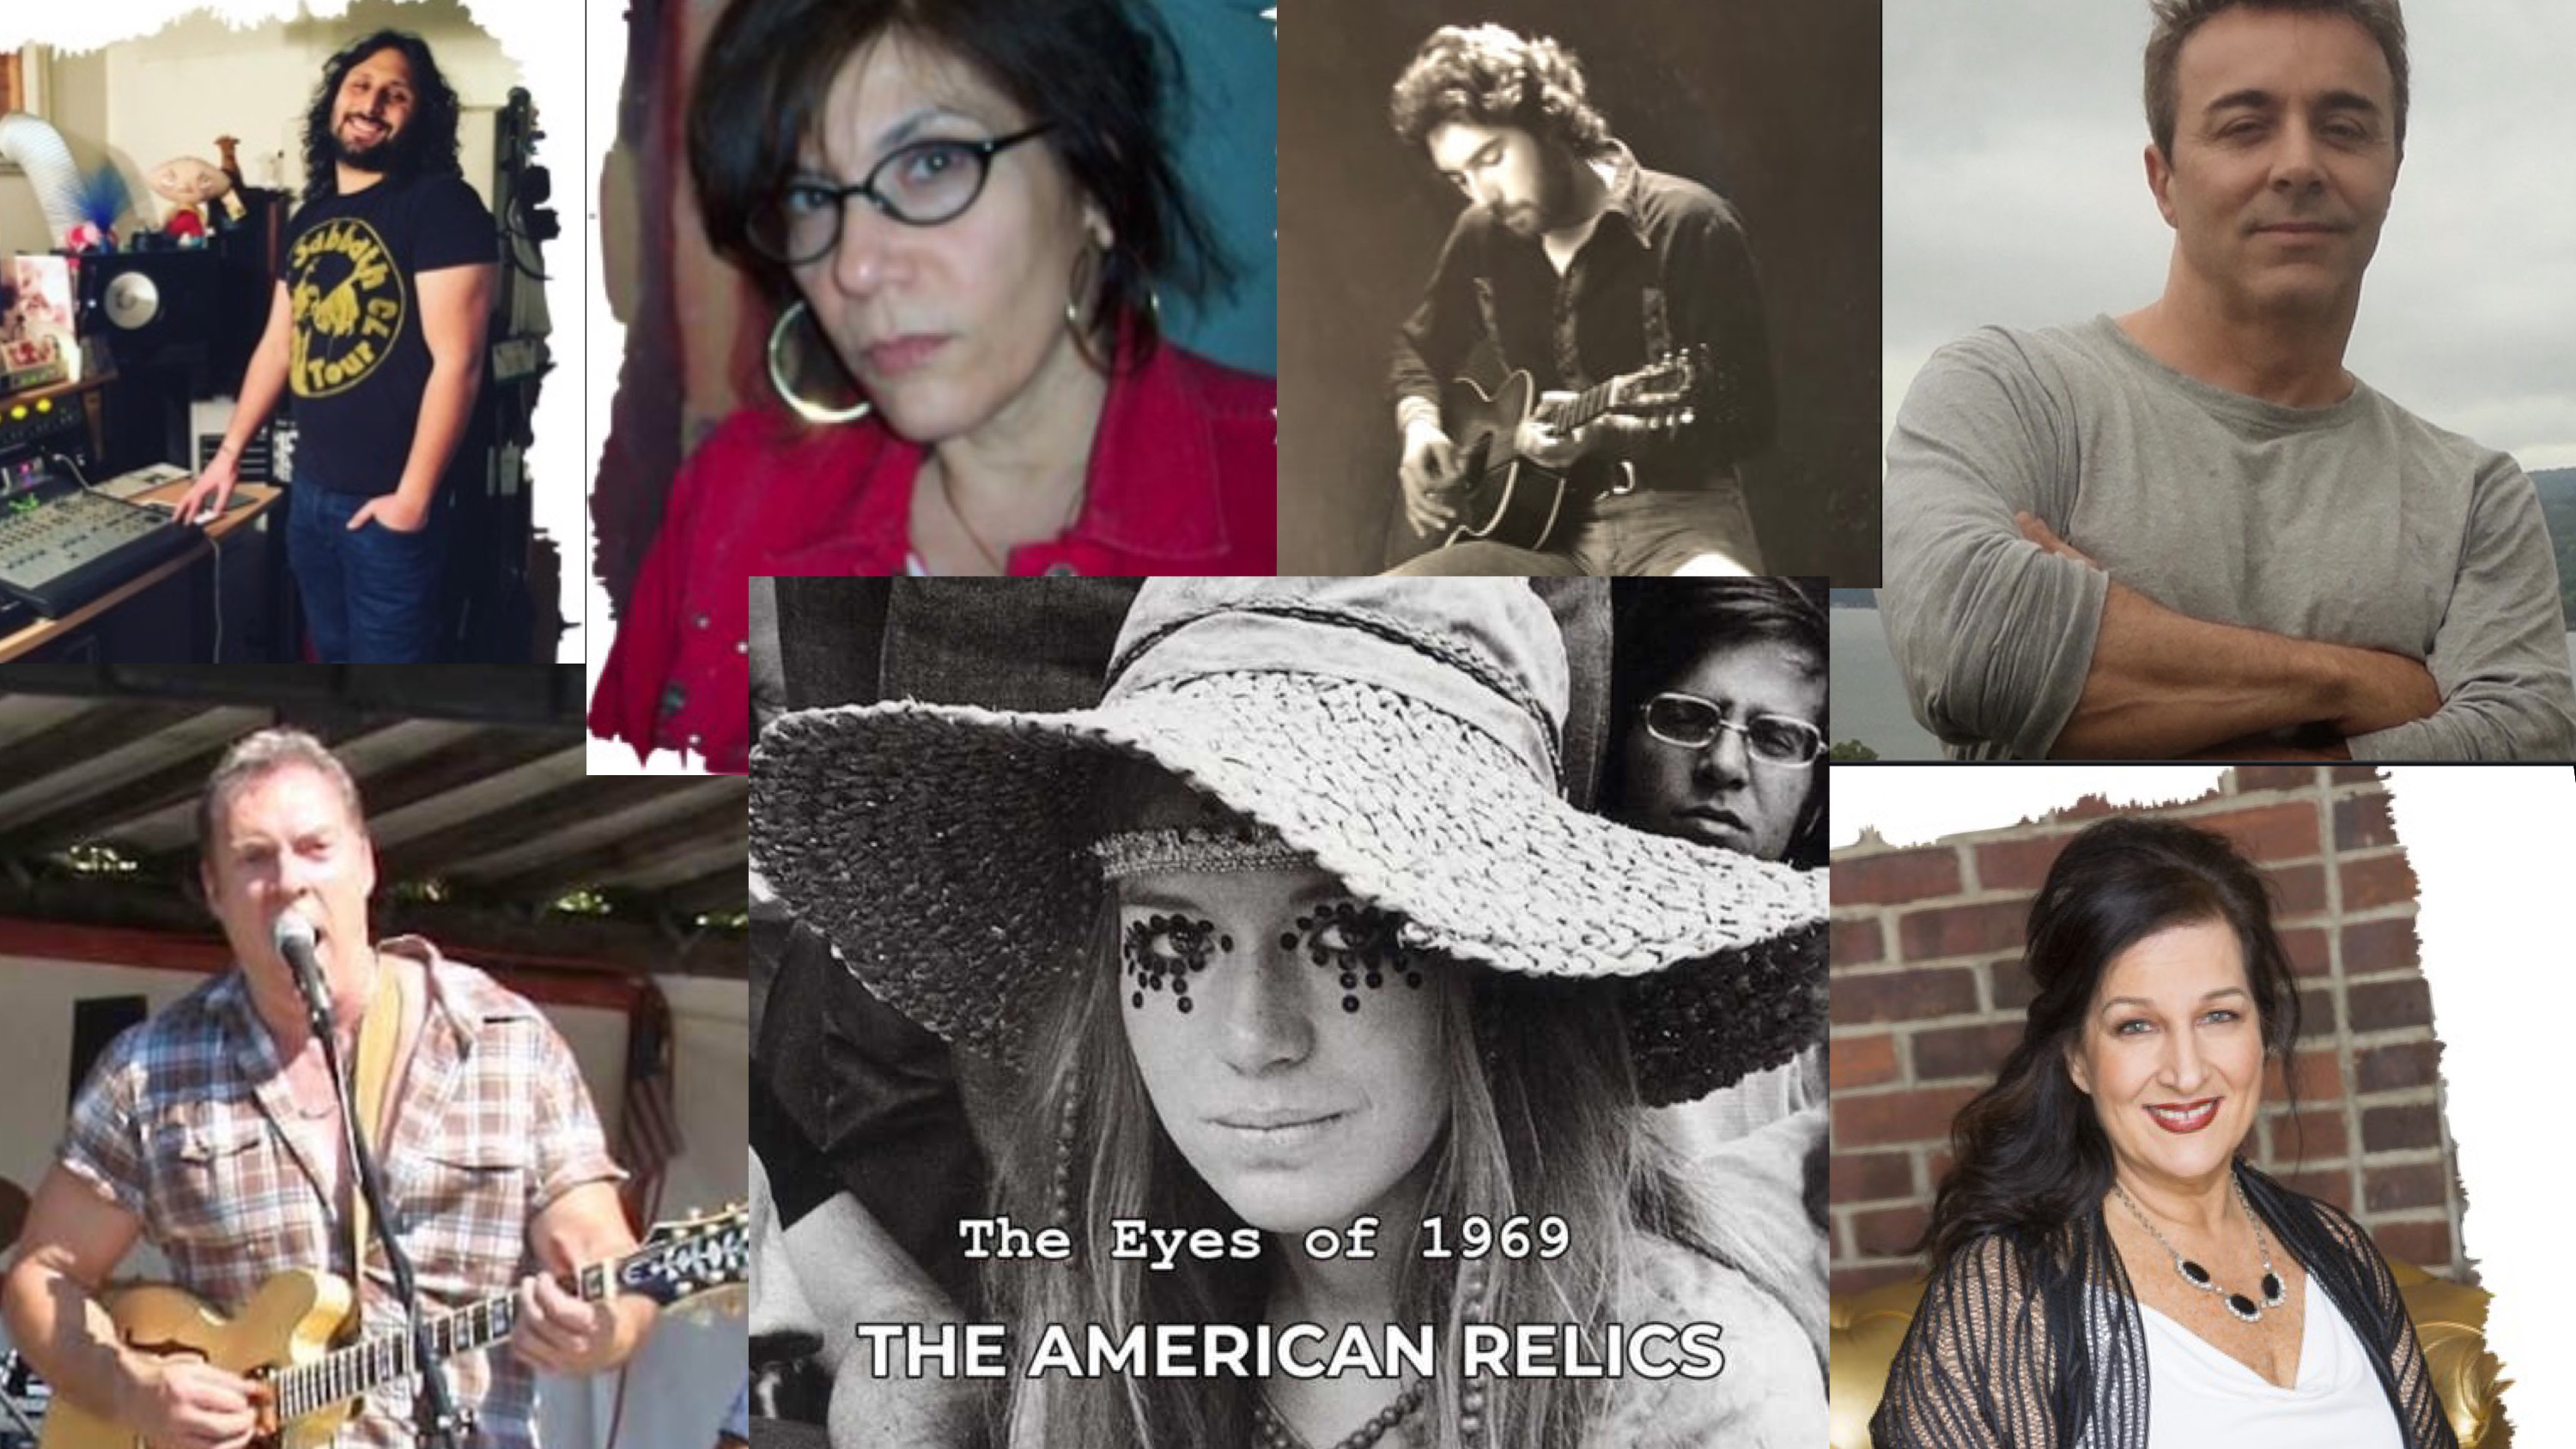 The American Relics New Album "The Eyes of 1969" Now Available Worldwide 